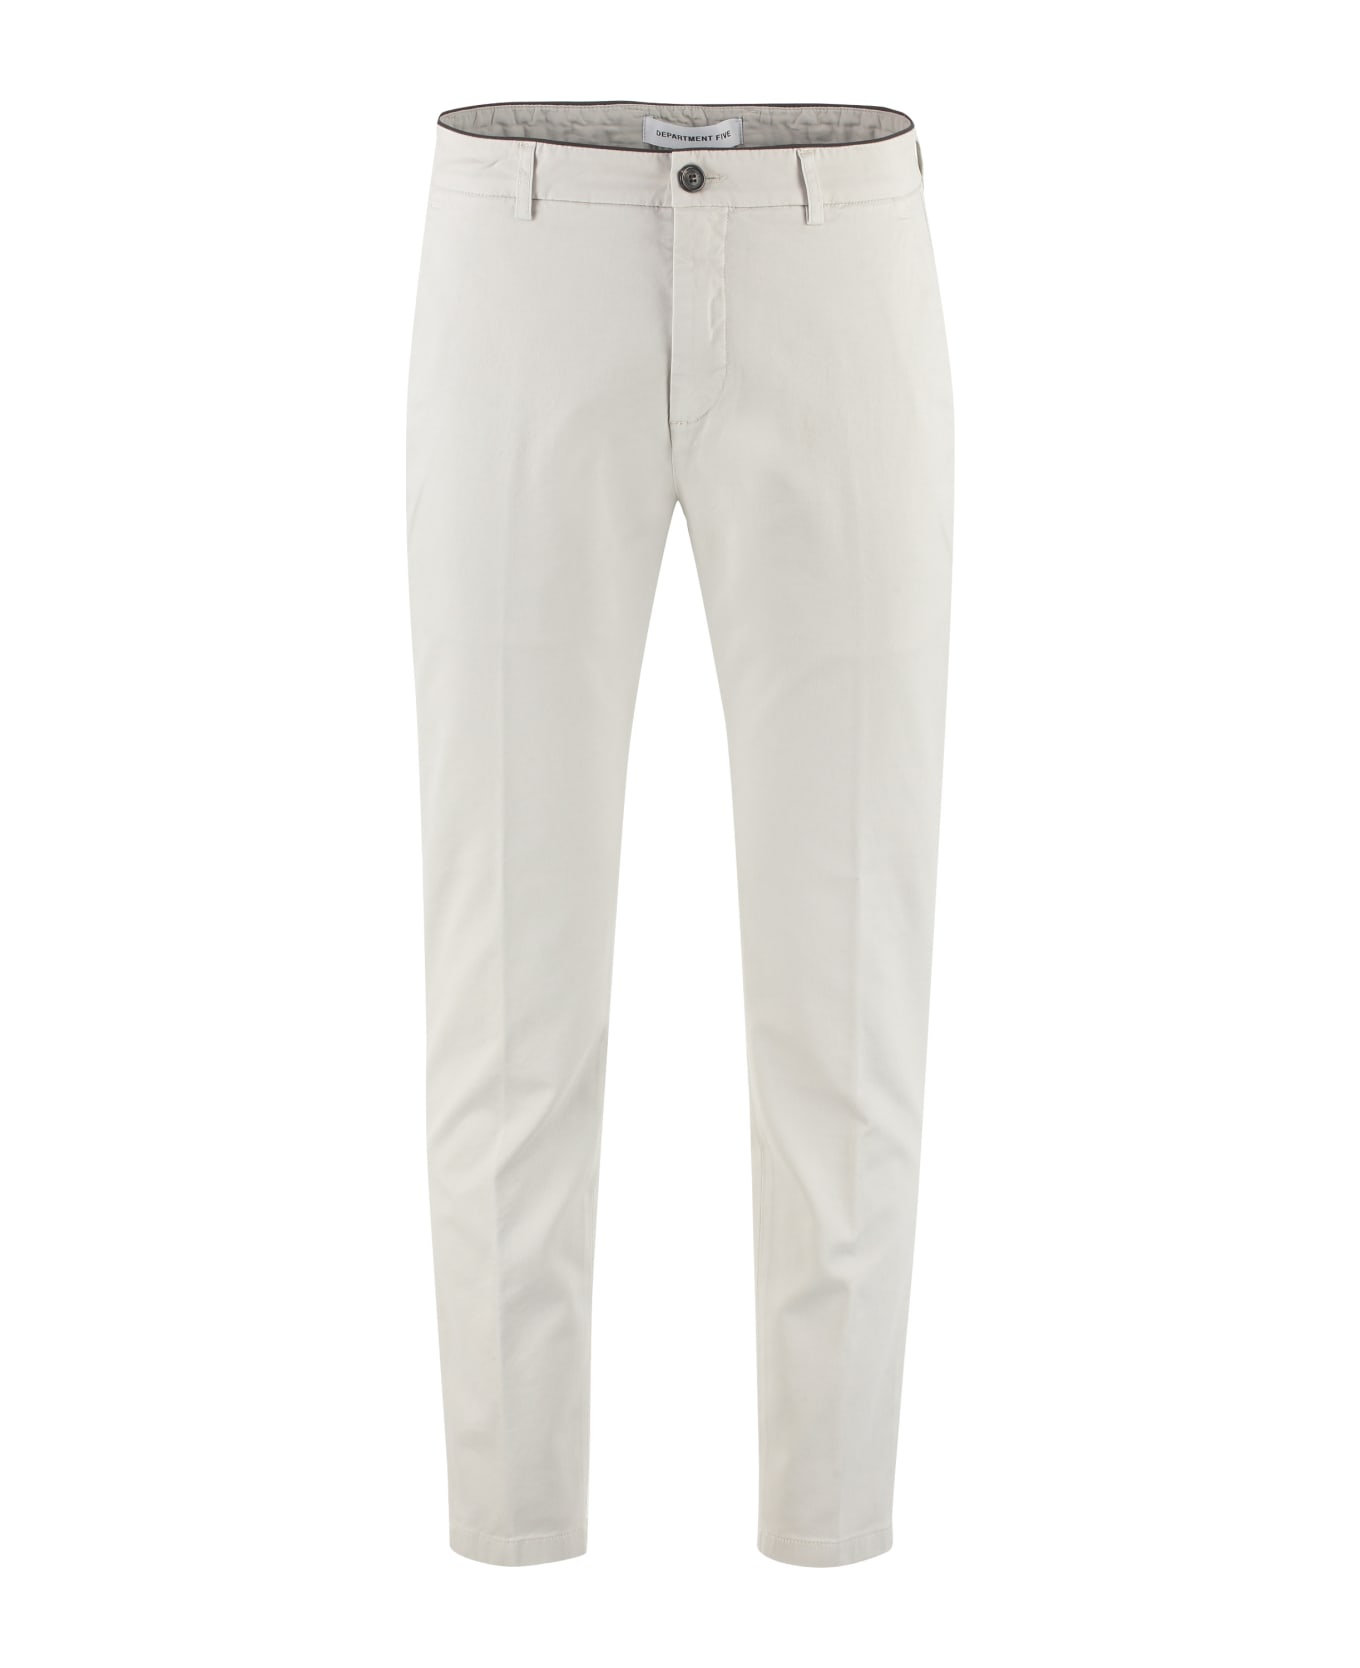 Department Five Prince Cotton Chino Trousers - grey